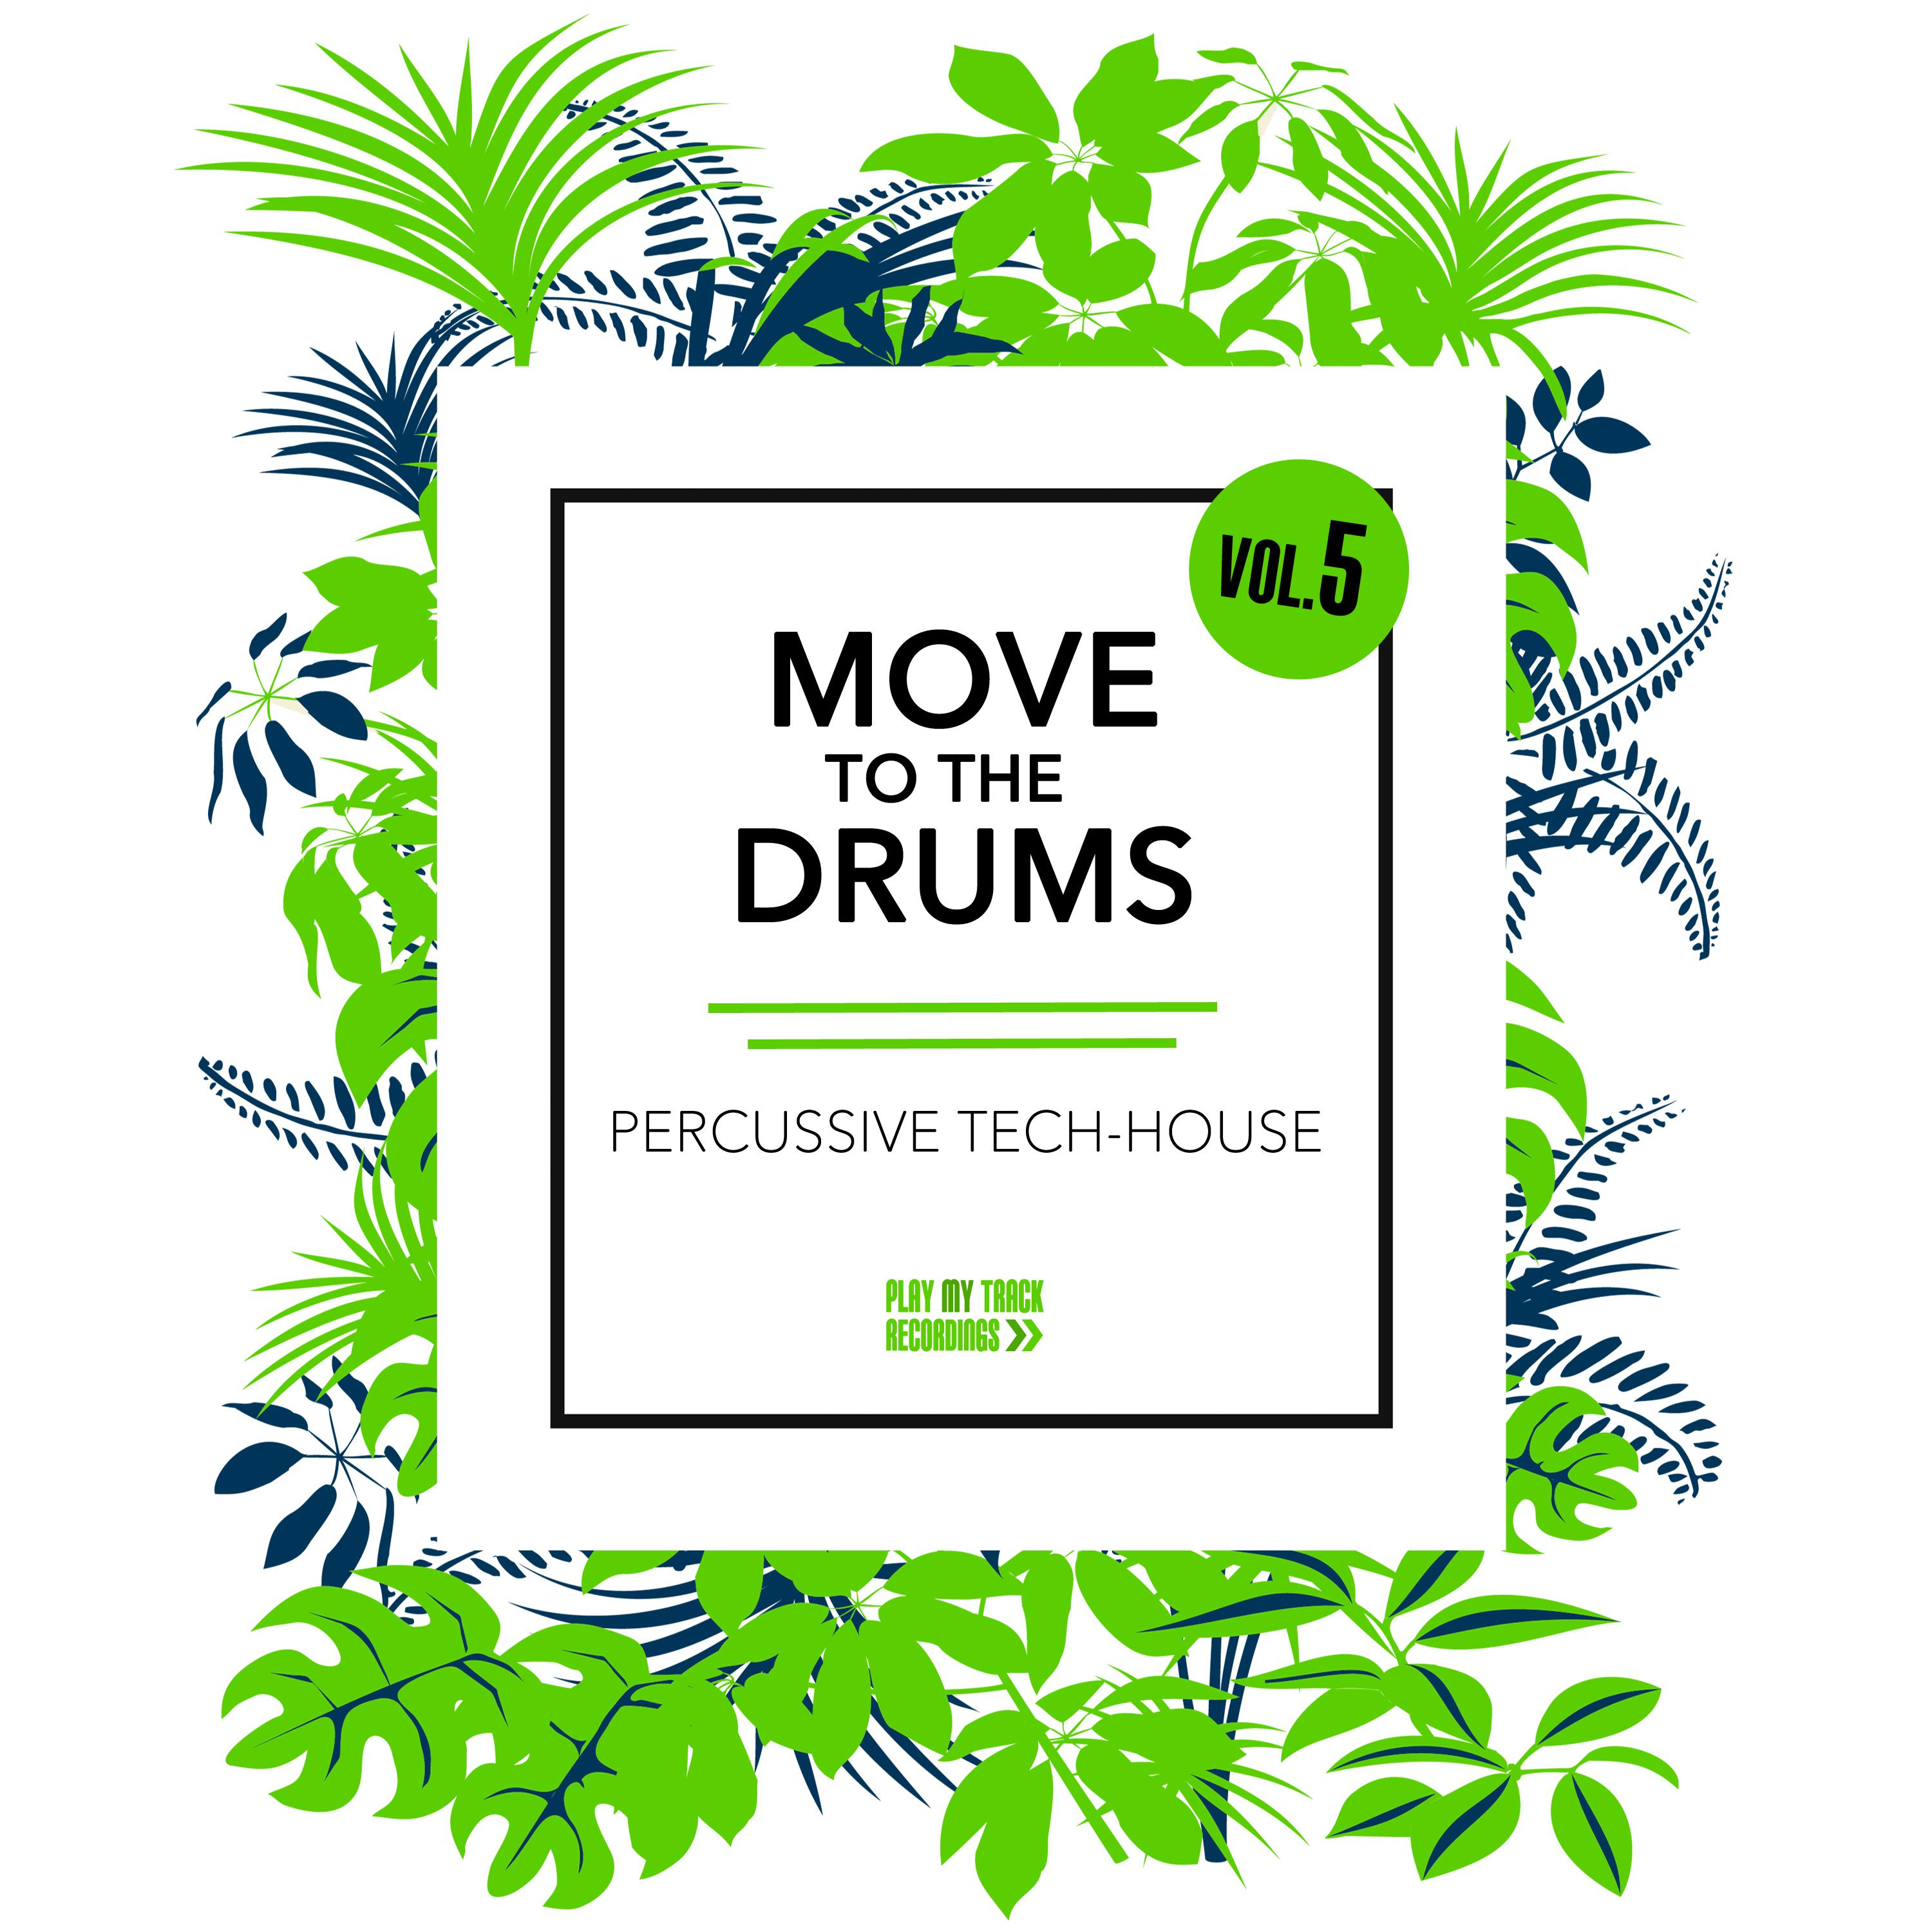 Move to the Drums, Vol. 5